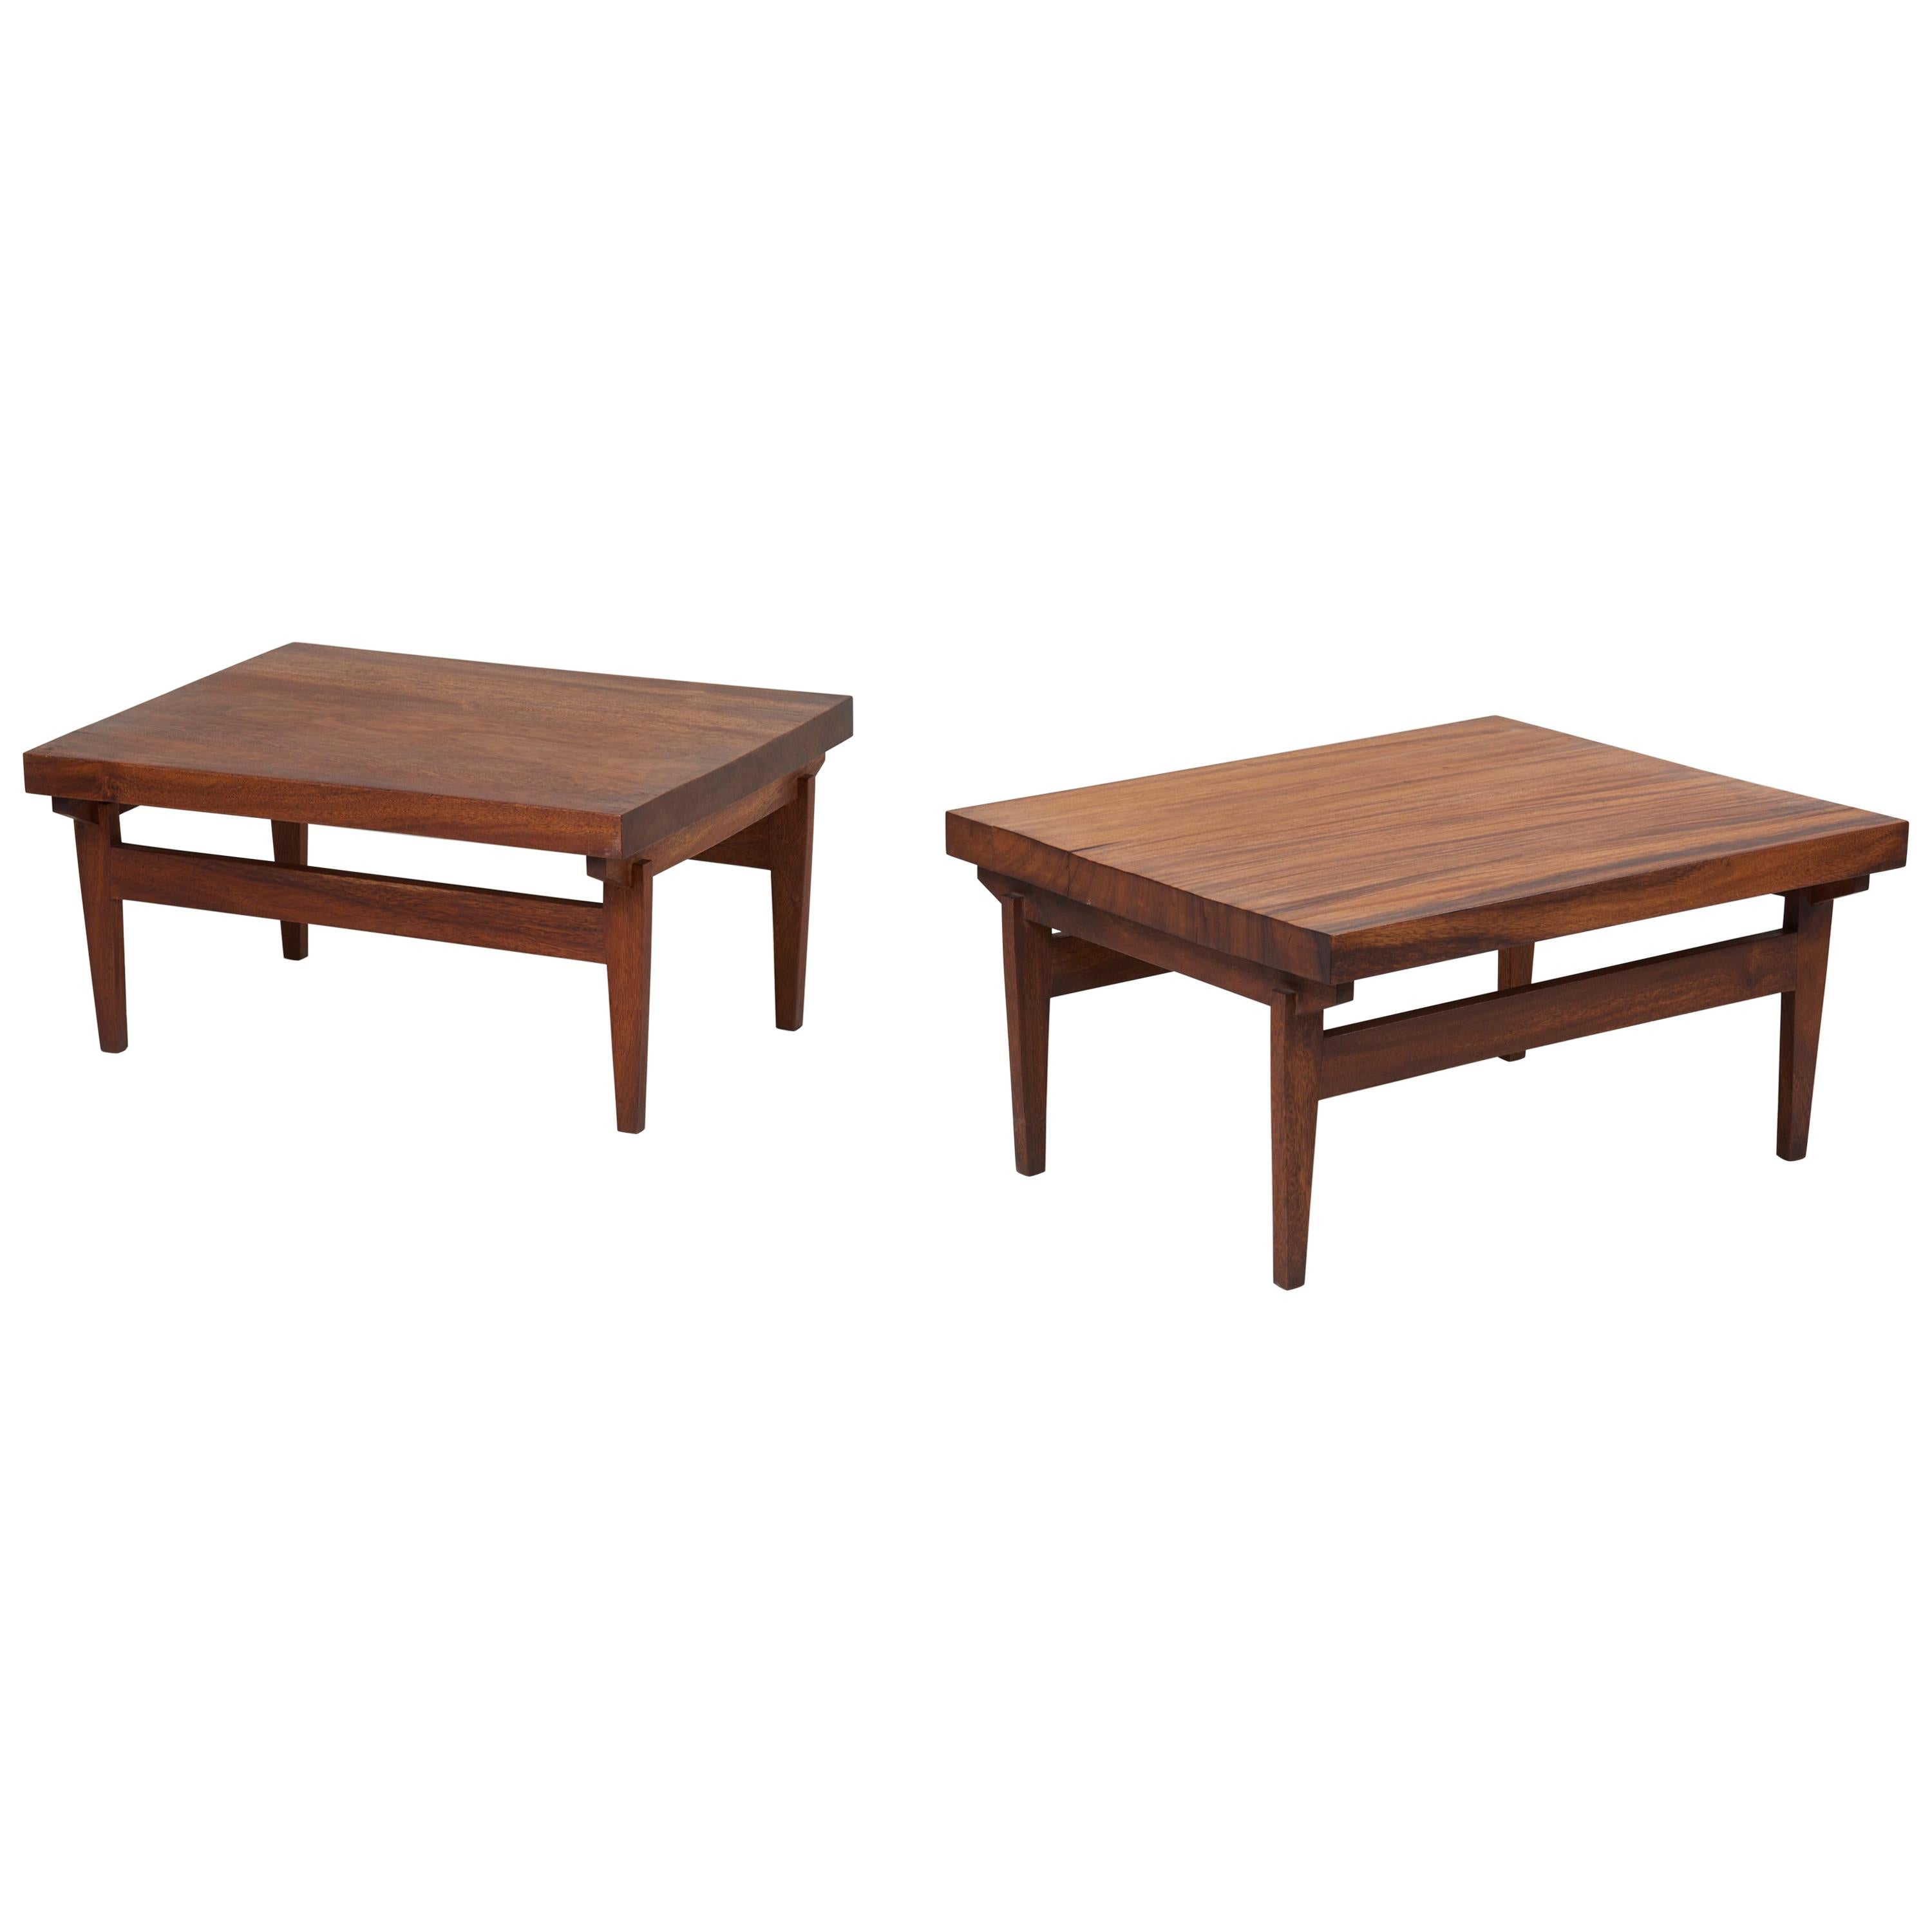 Pair of Signed Studio Craft End Tables, Guatemala, 1960s For Sale